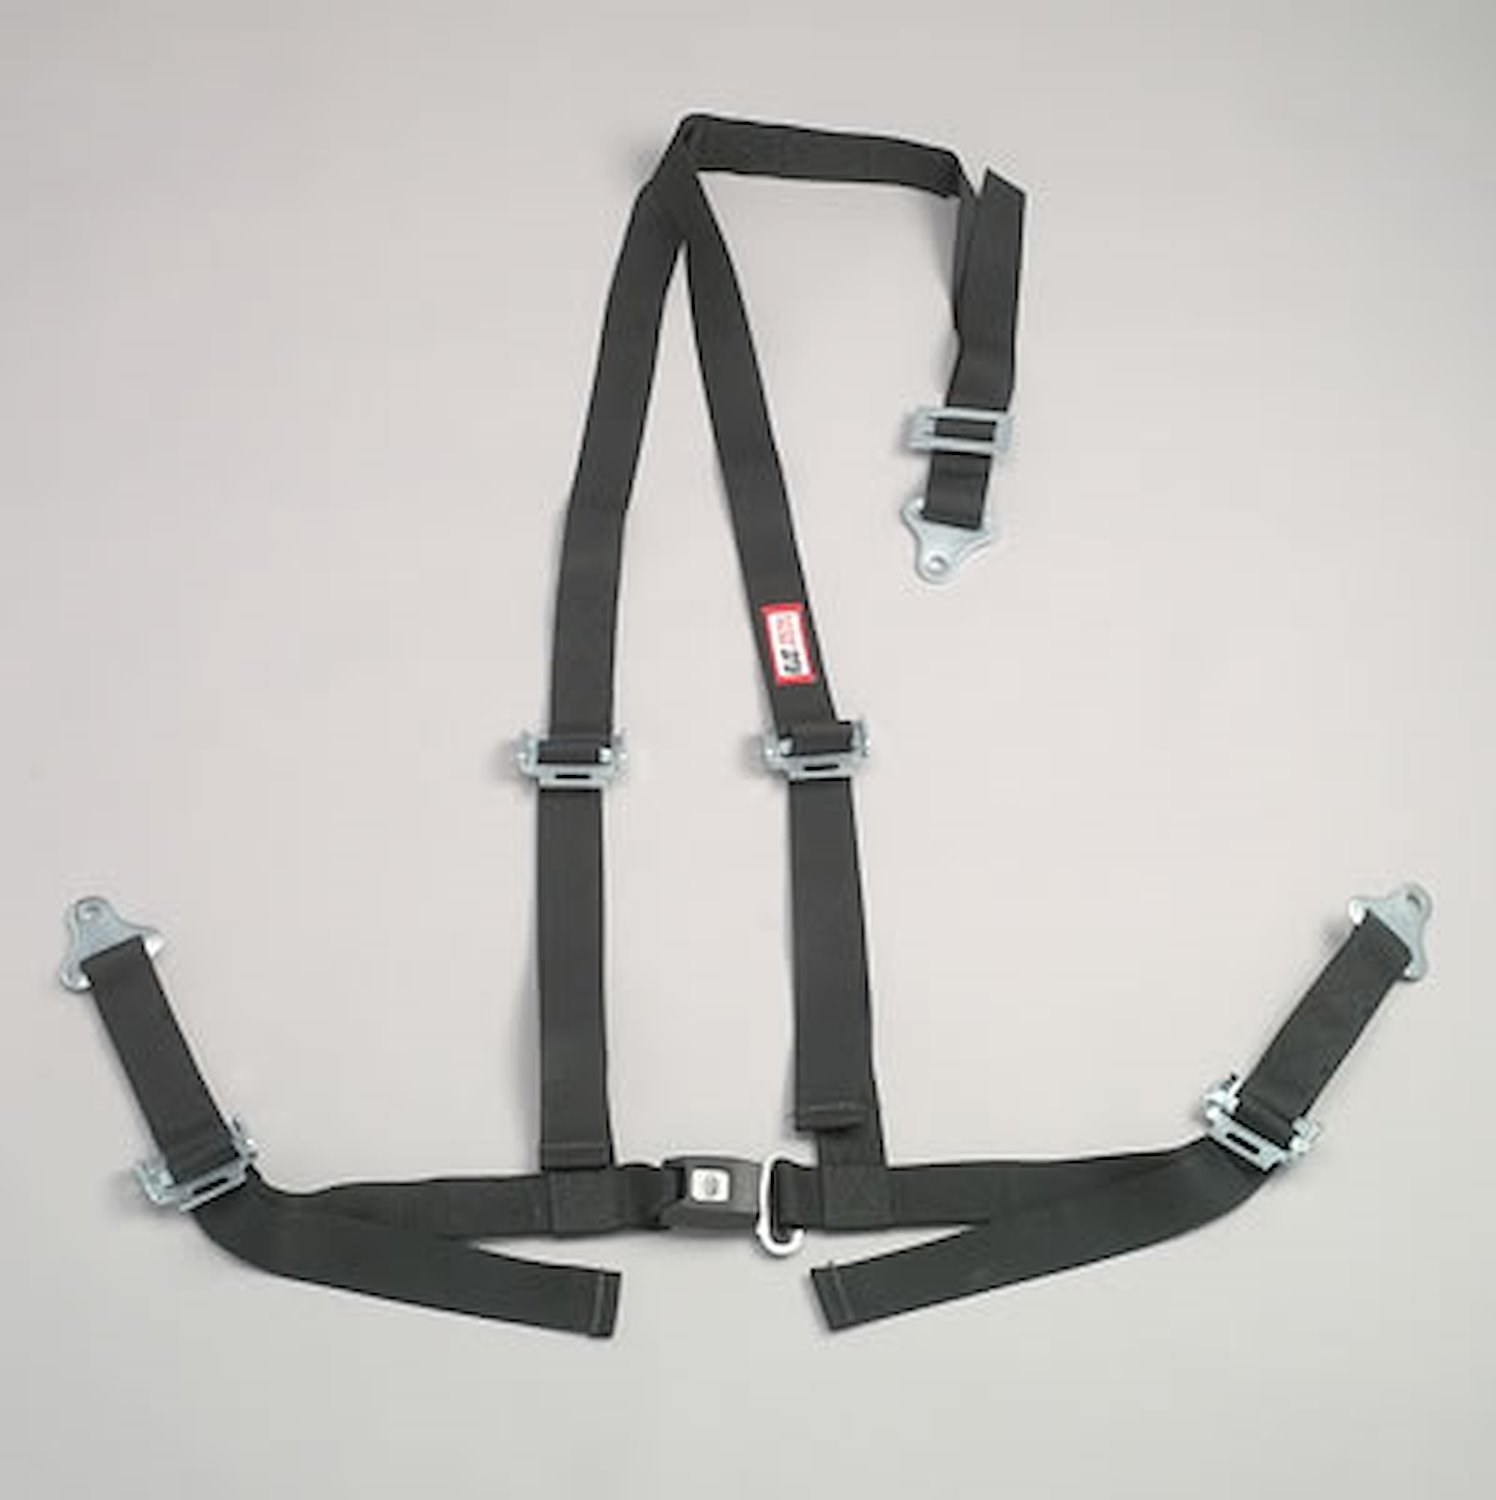 NON-SFI B&T HARNESS 2 PULL DOWN Lap Belt SNAP 2 S. H. Y FLOOR Mount WRAP/SNAP w/STERNUM STRAP OD GREEN